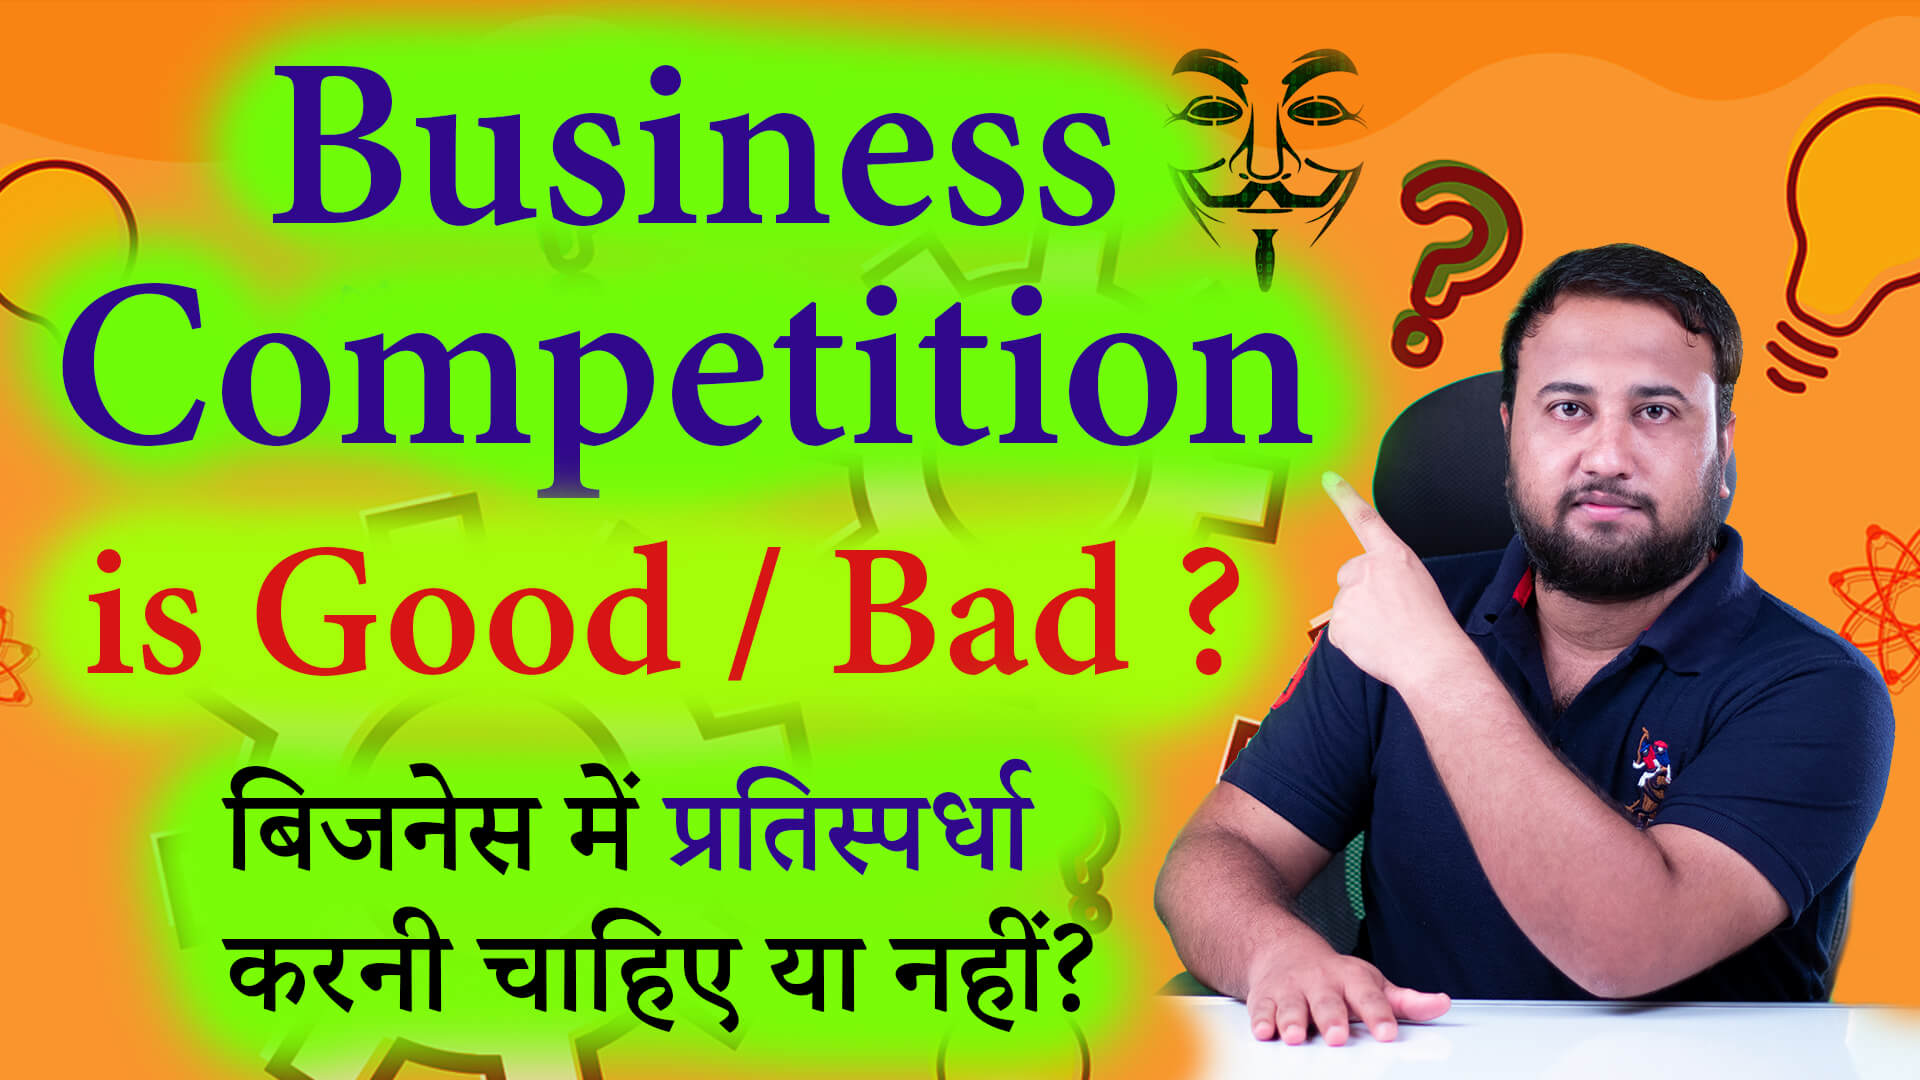 You are currently viewing Lesson – 23: बिजनेस में प्रतिस्पर्धा करनी चाहिए या नहीं? Business Competition is Good / Bad ?